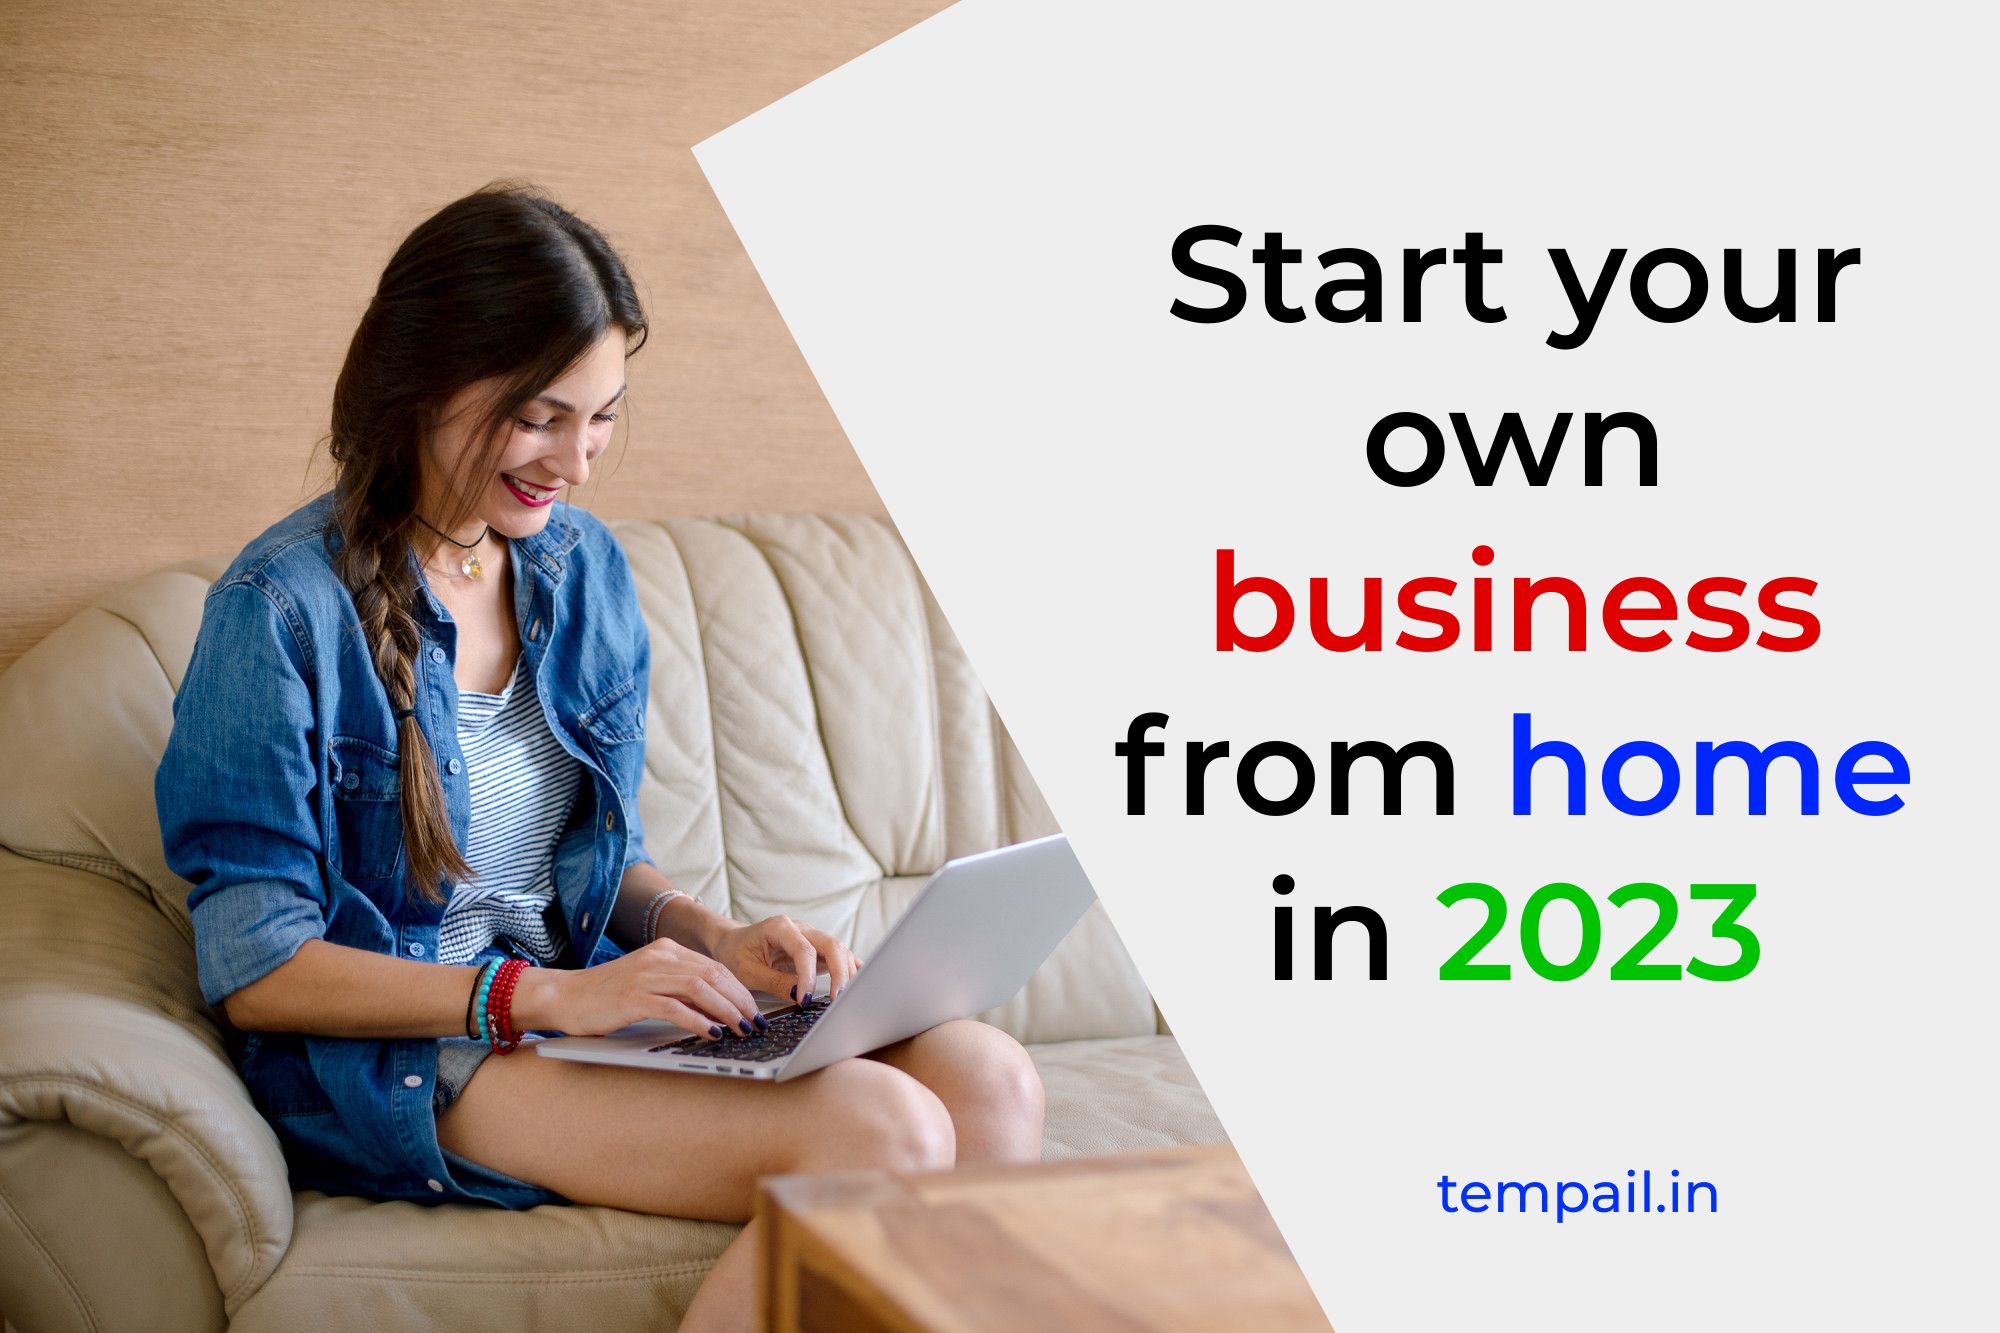 Start your own business from home with these 12 unique ideas in 2023